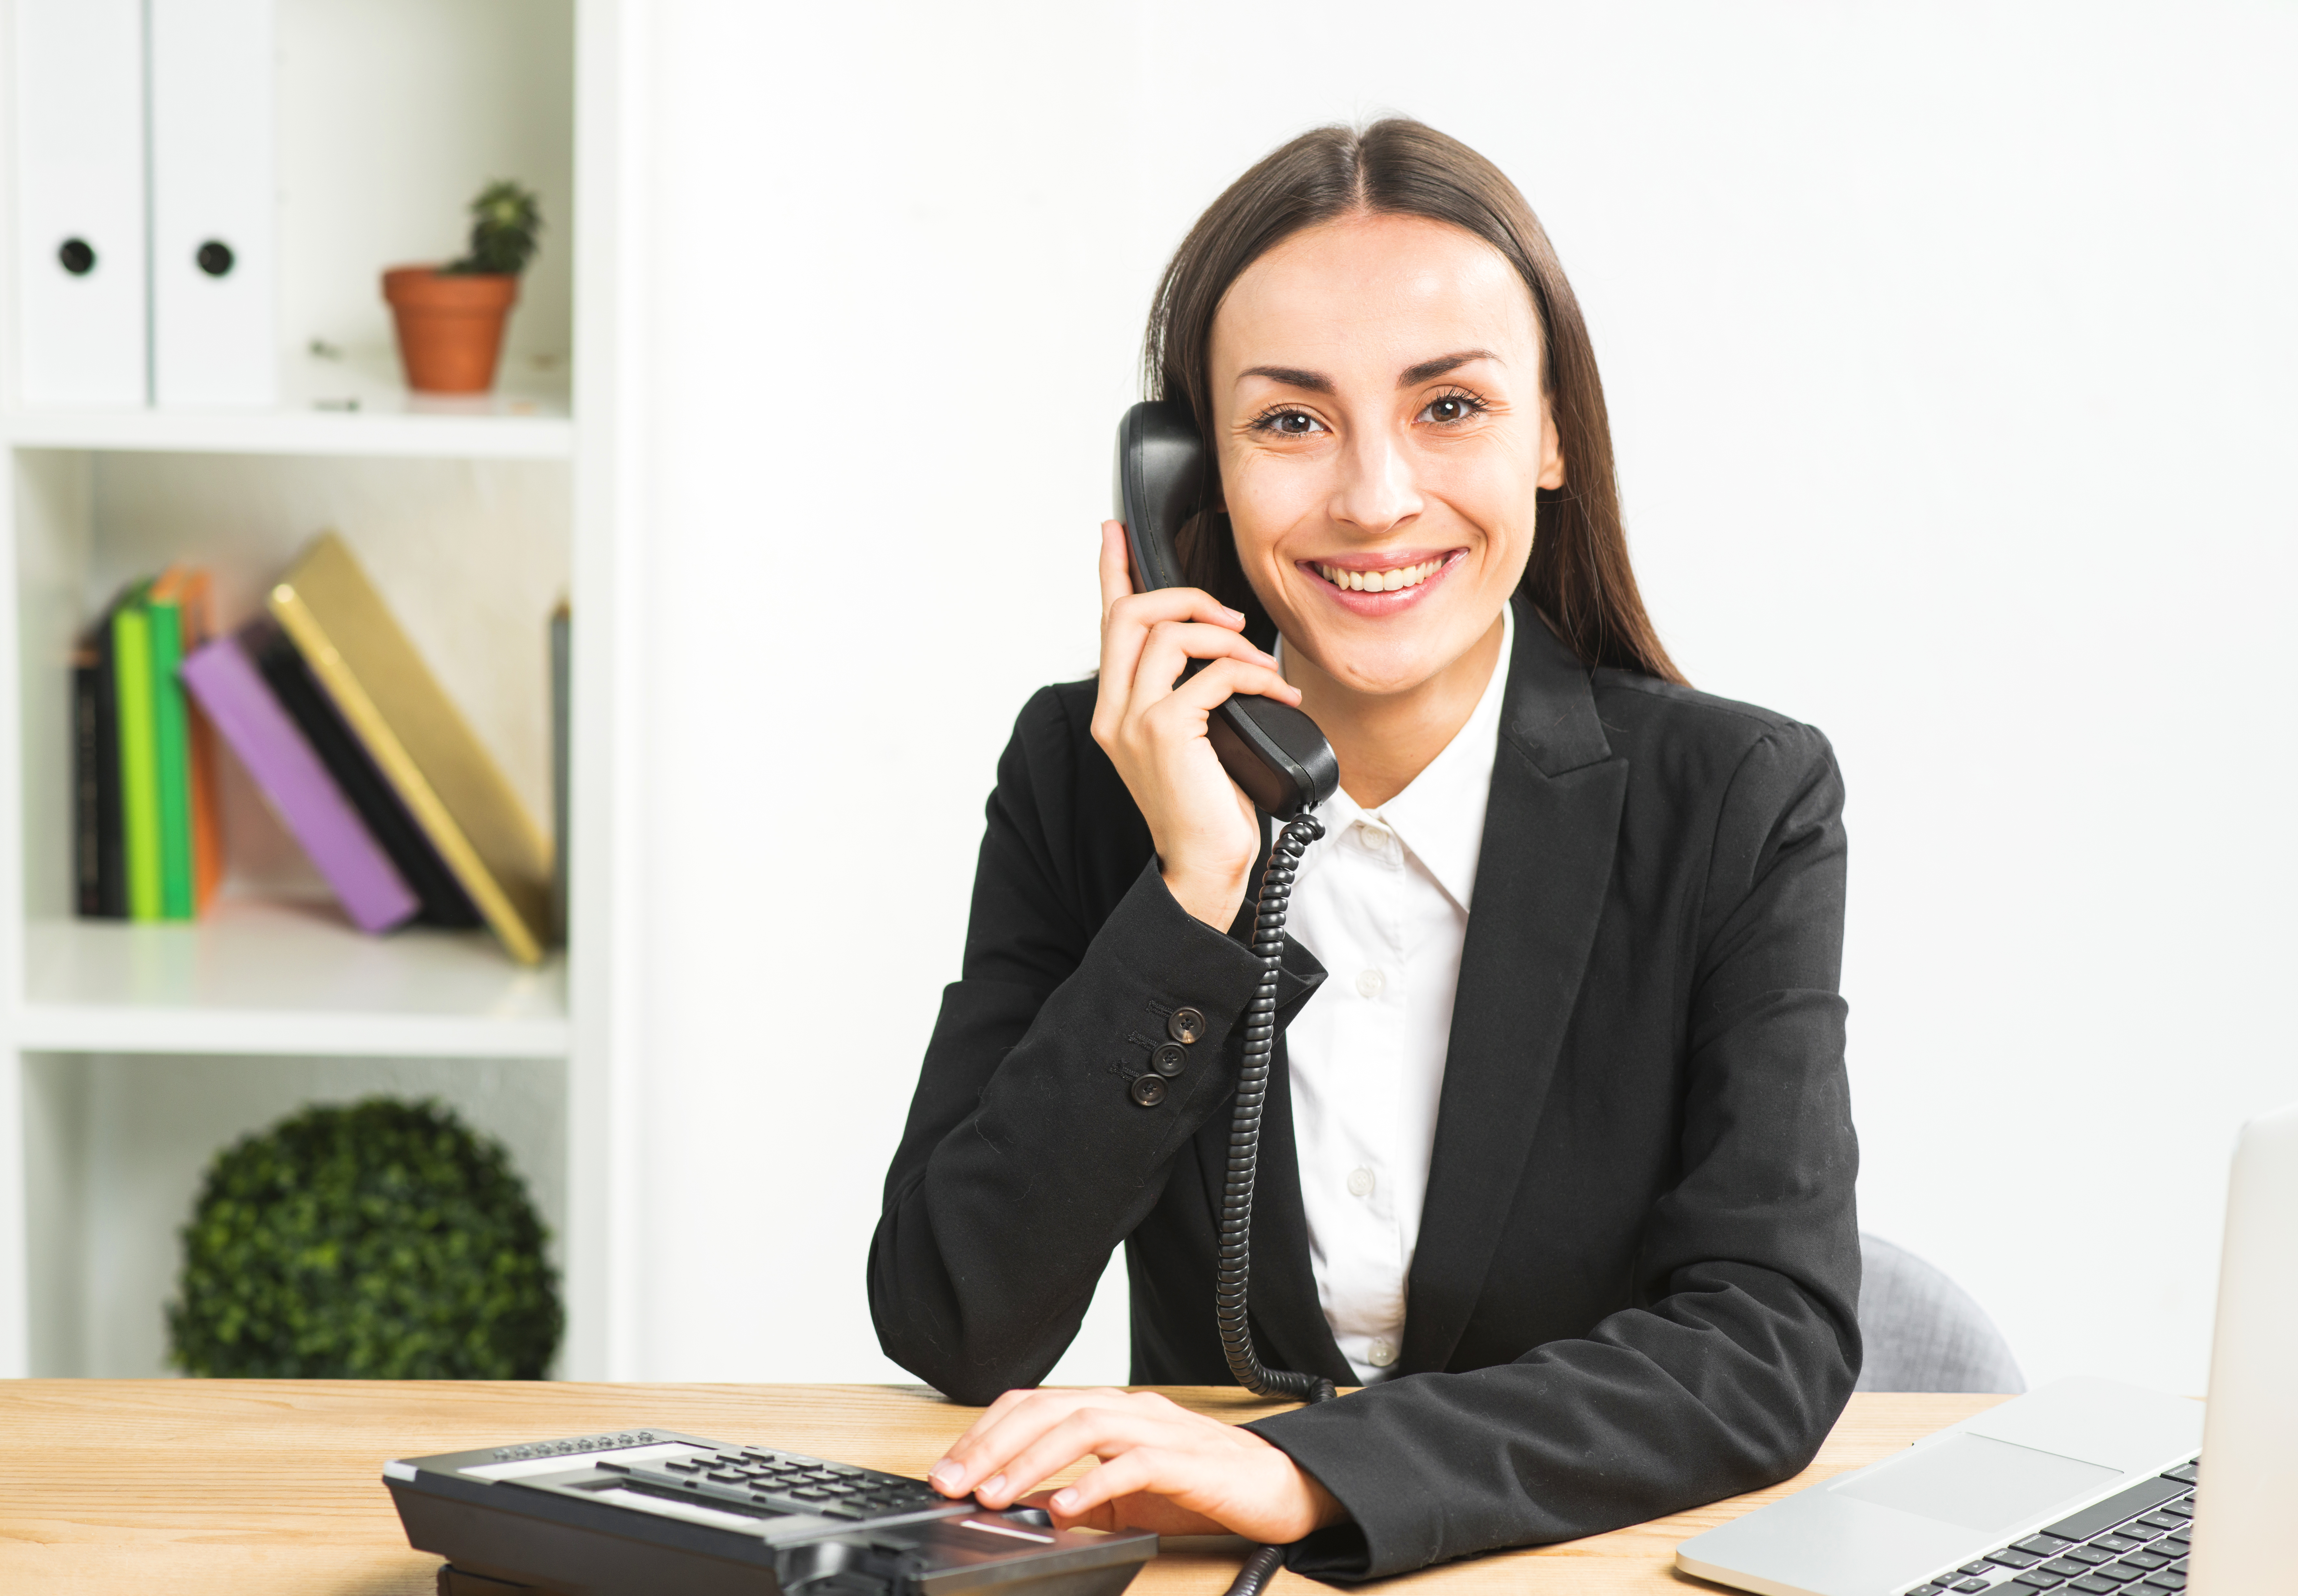 portrait-of-young-businesswoman-talking-on-telephone-looking-at-camera